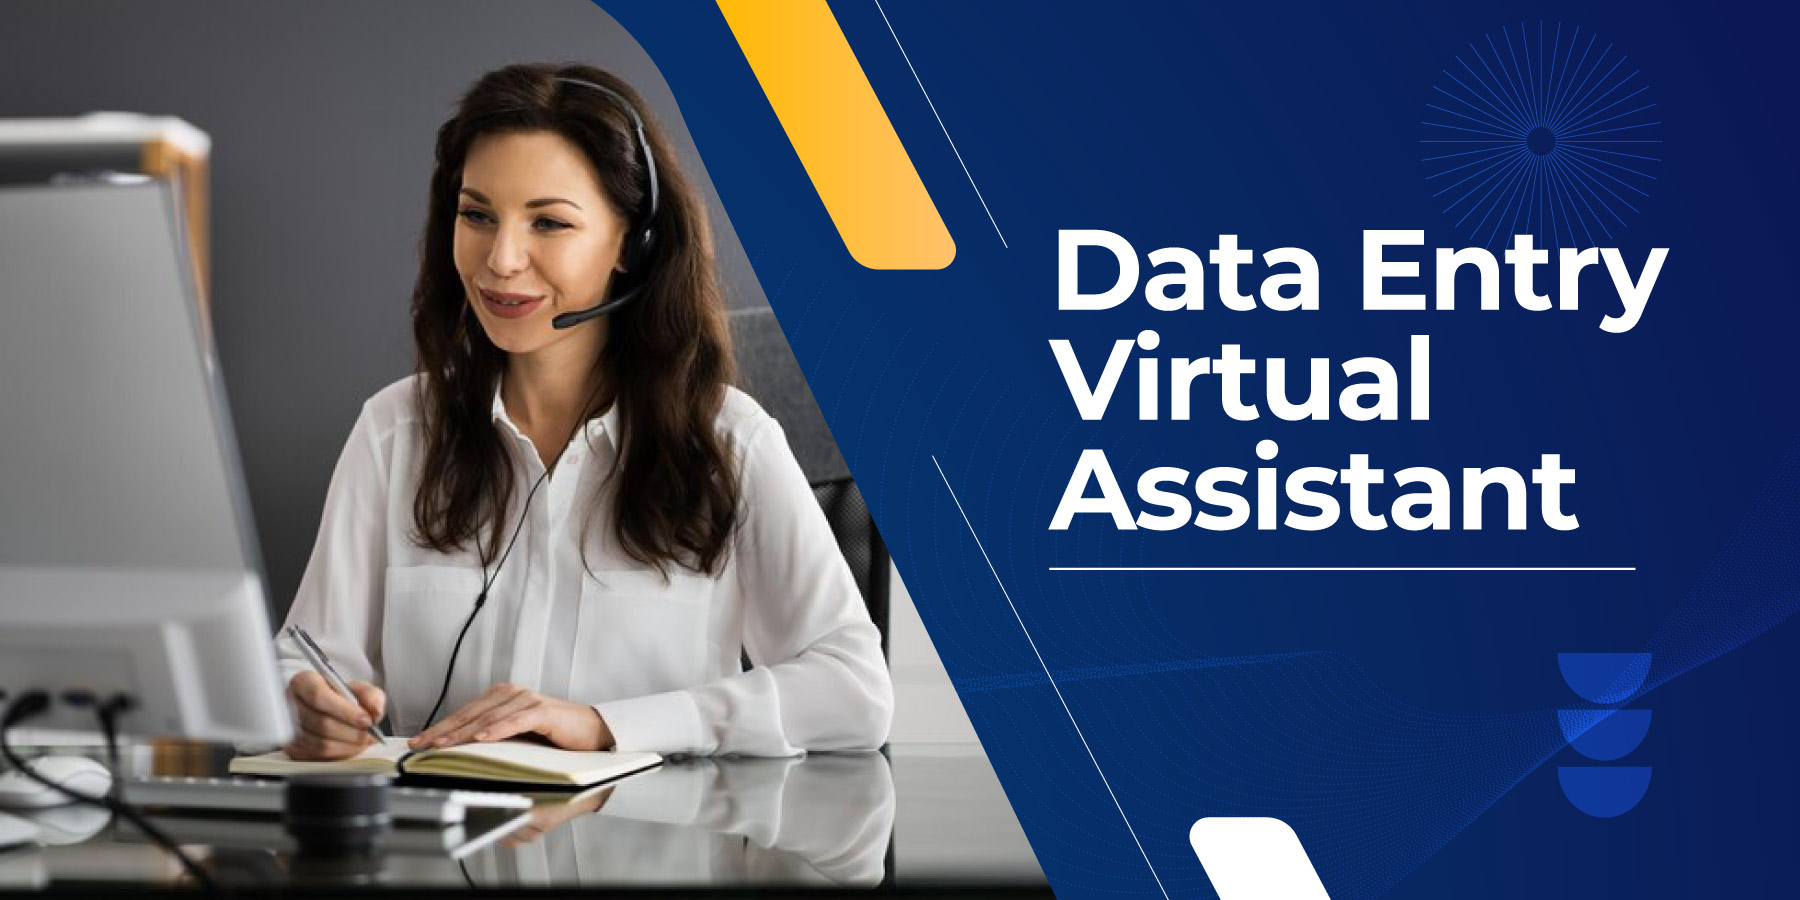 Data Entry Virtual Assistant